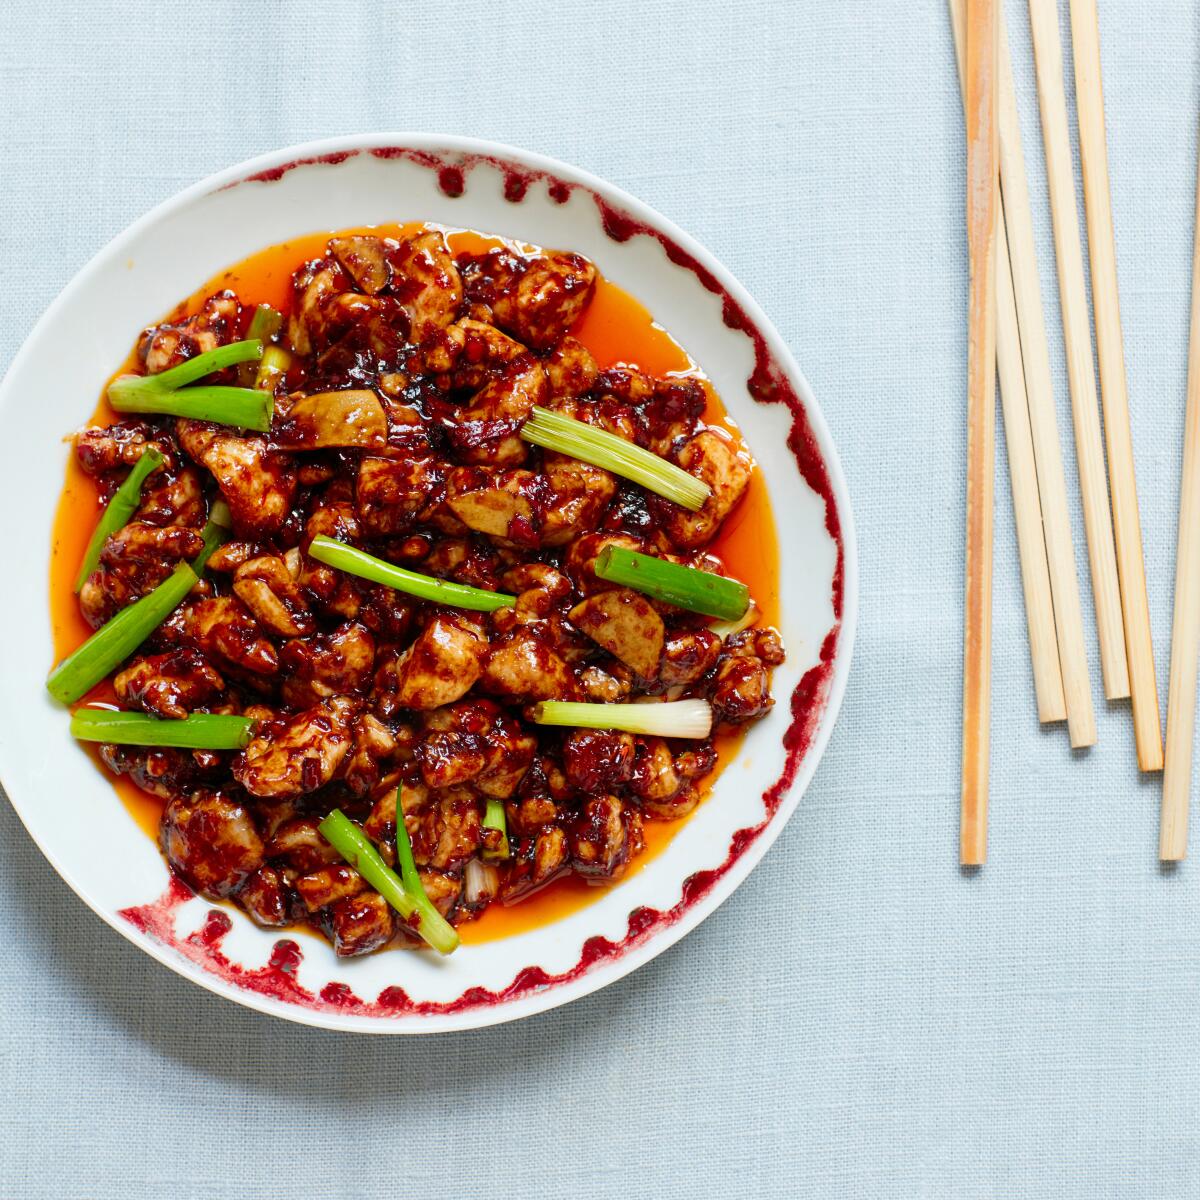 Scallion greens added at the end brighten this chile-paste kung pao chicken.